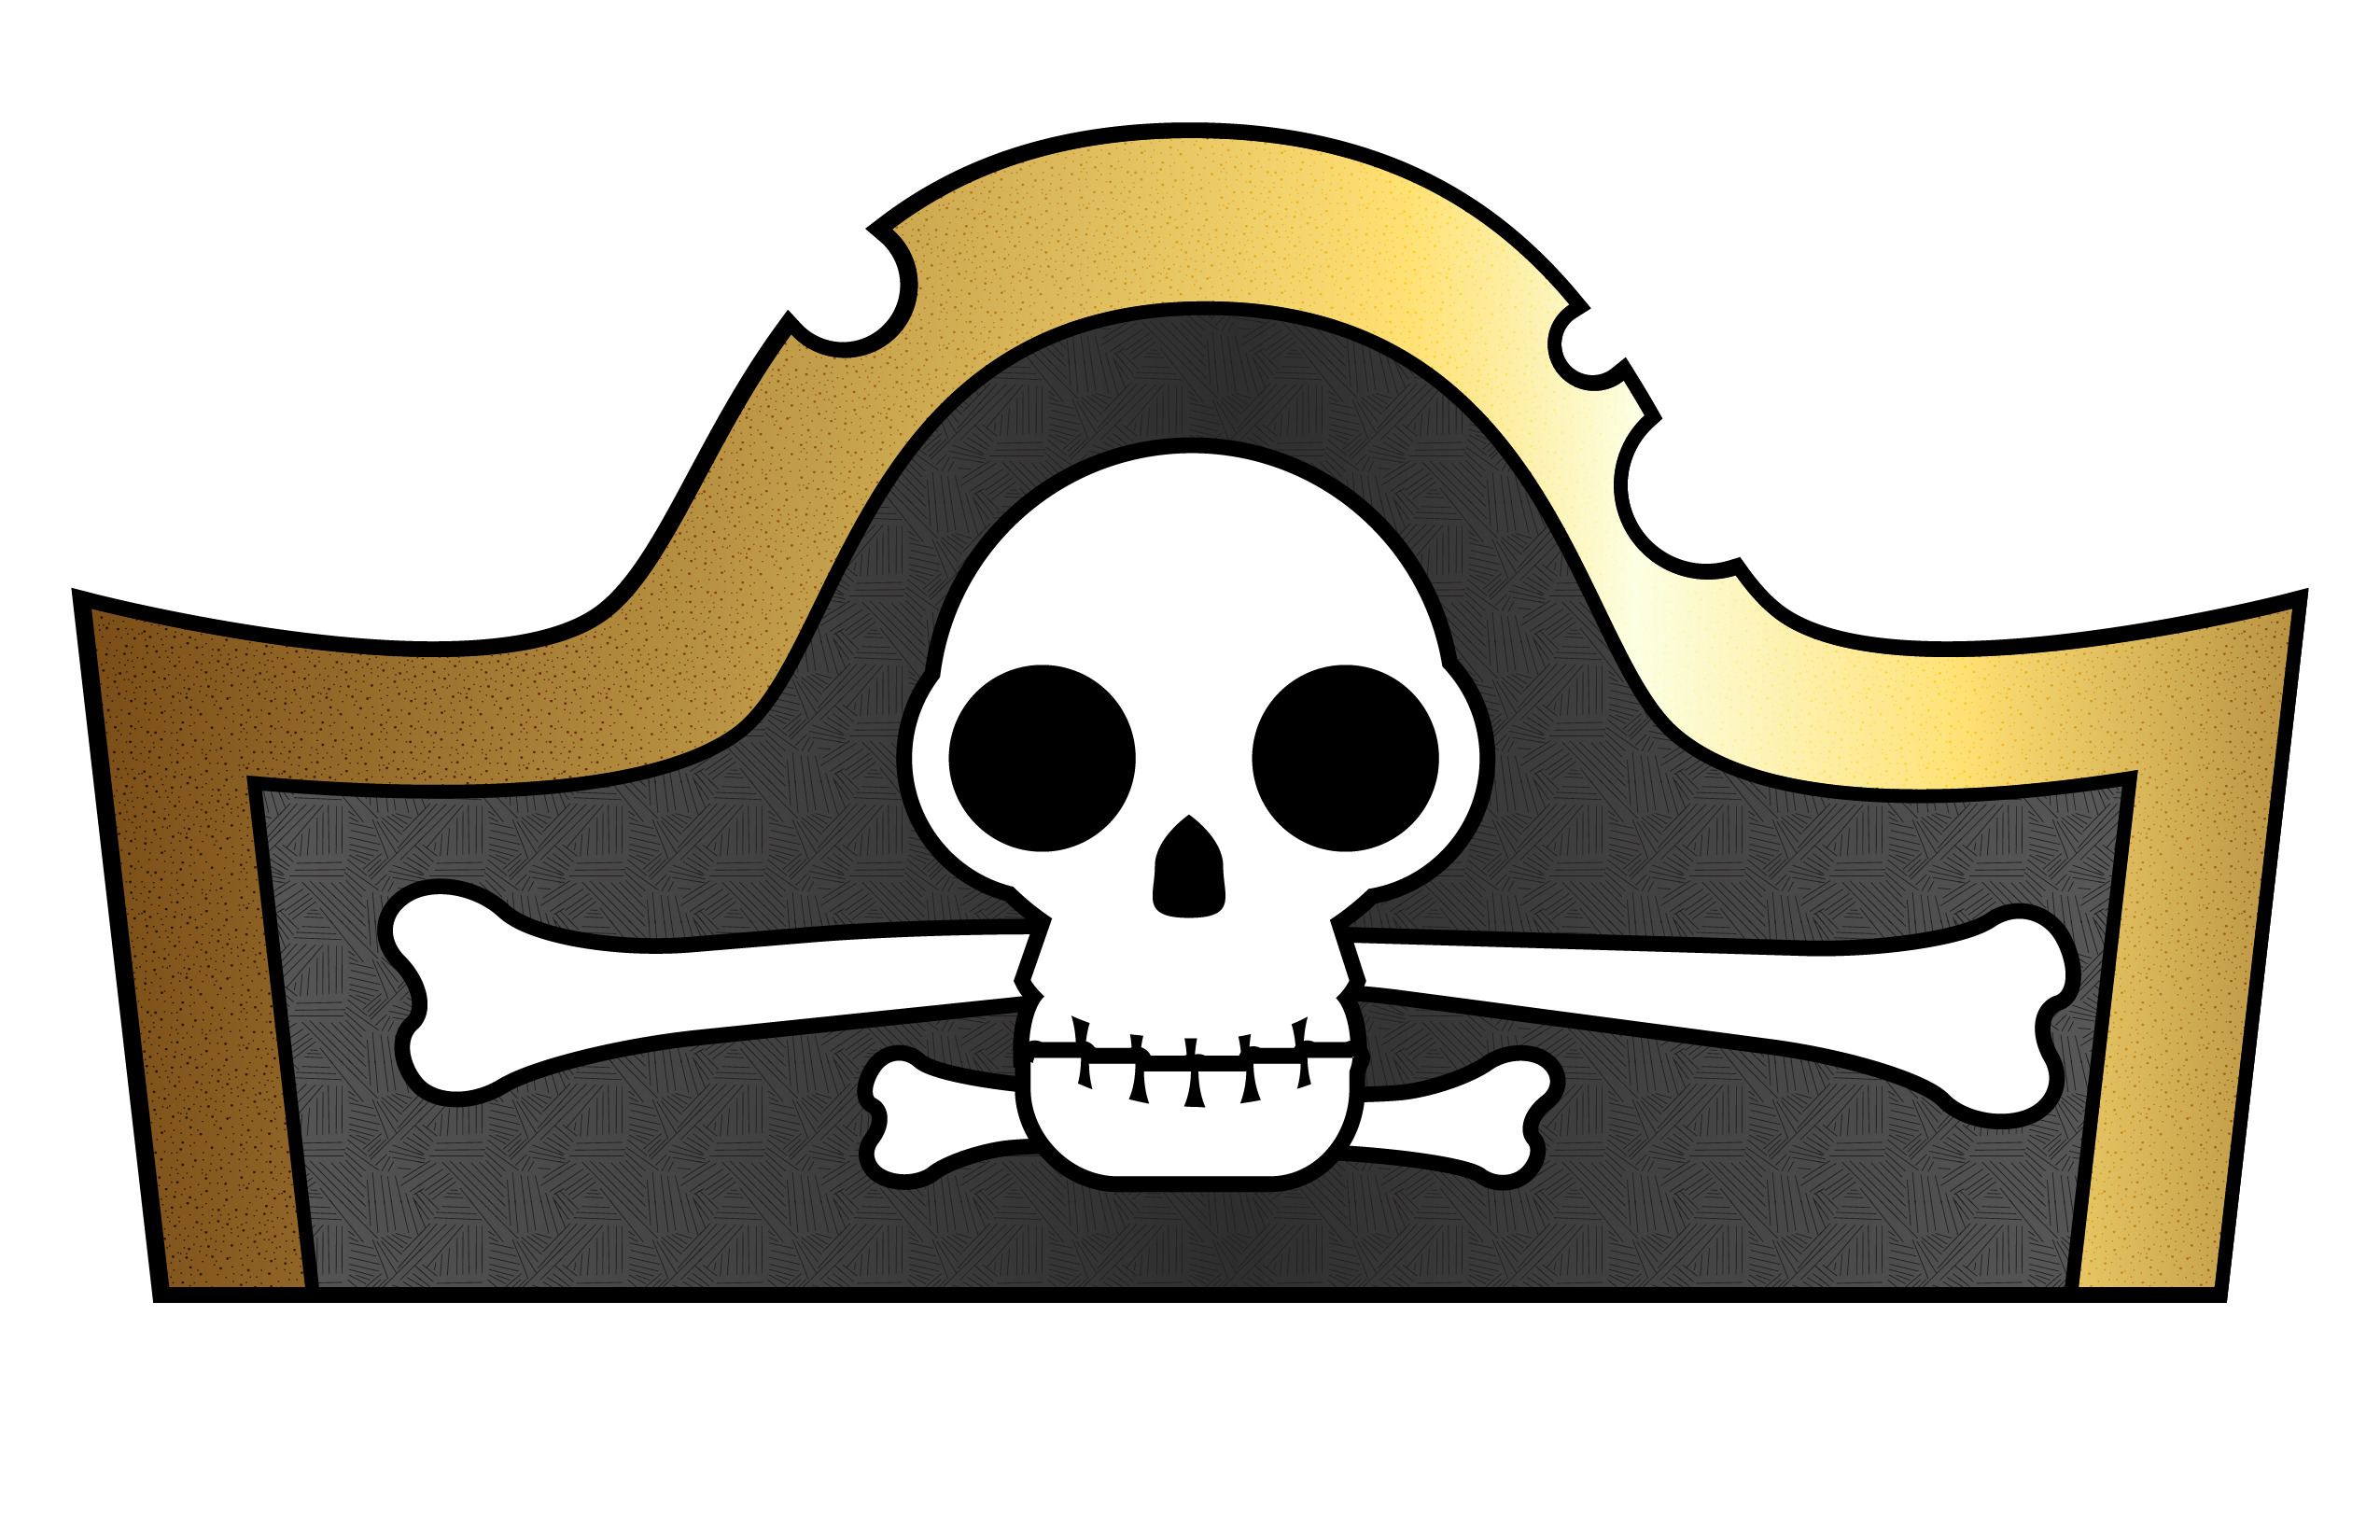 Printable Pirate Hat Template